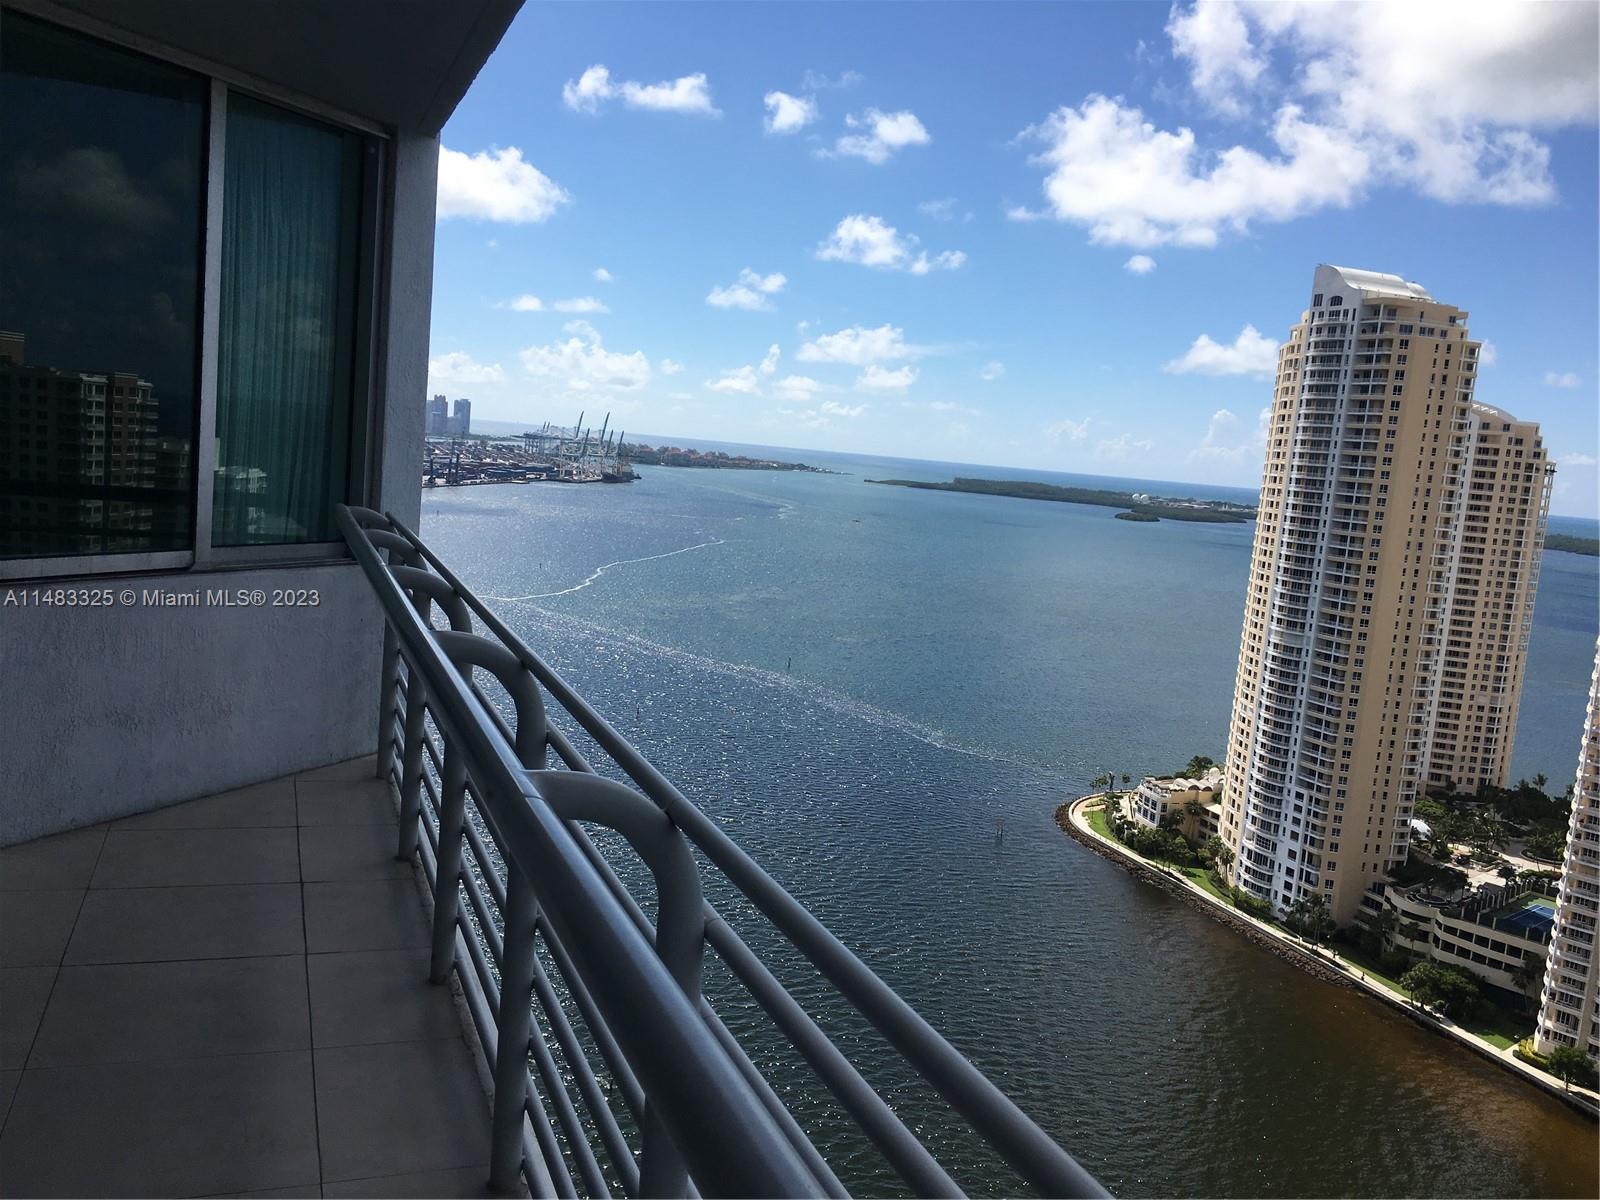 Rarely available south-facing apartment with breathtaking view of Biscayne Bay, Brickell Key and the ocean. One
Miami is a full service luxury condo in the epicenter of Miami, walking distance to Whole Foods, world class
restaurants, pack and metro mover